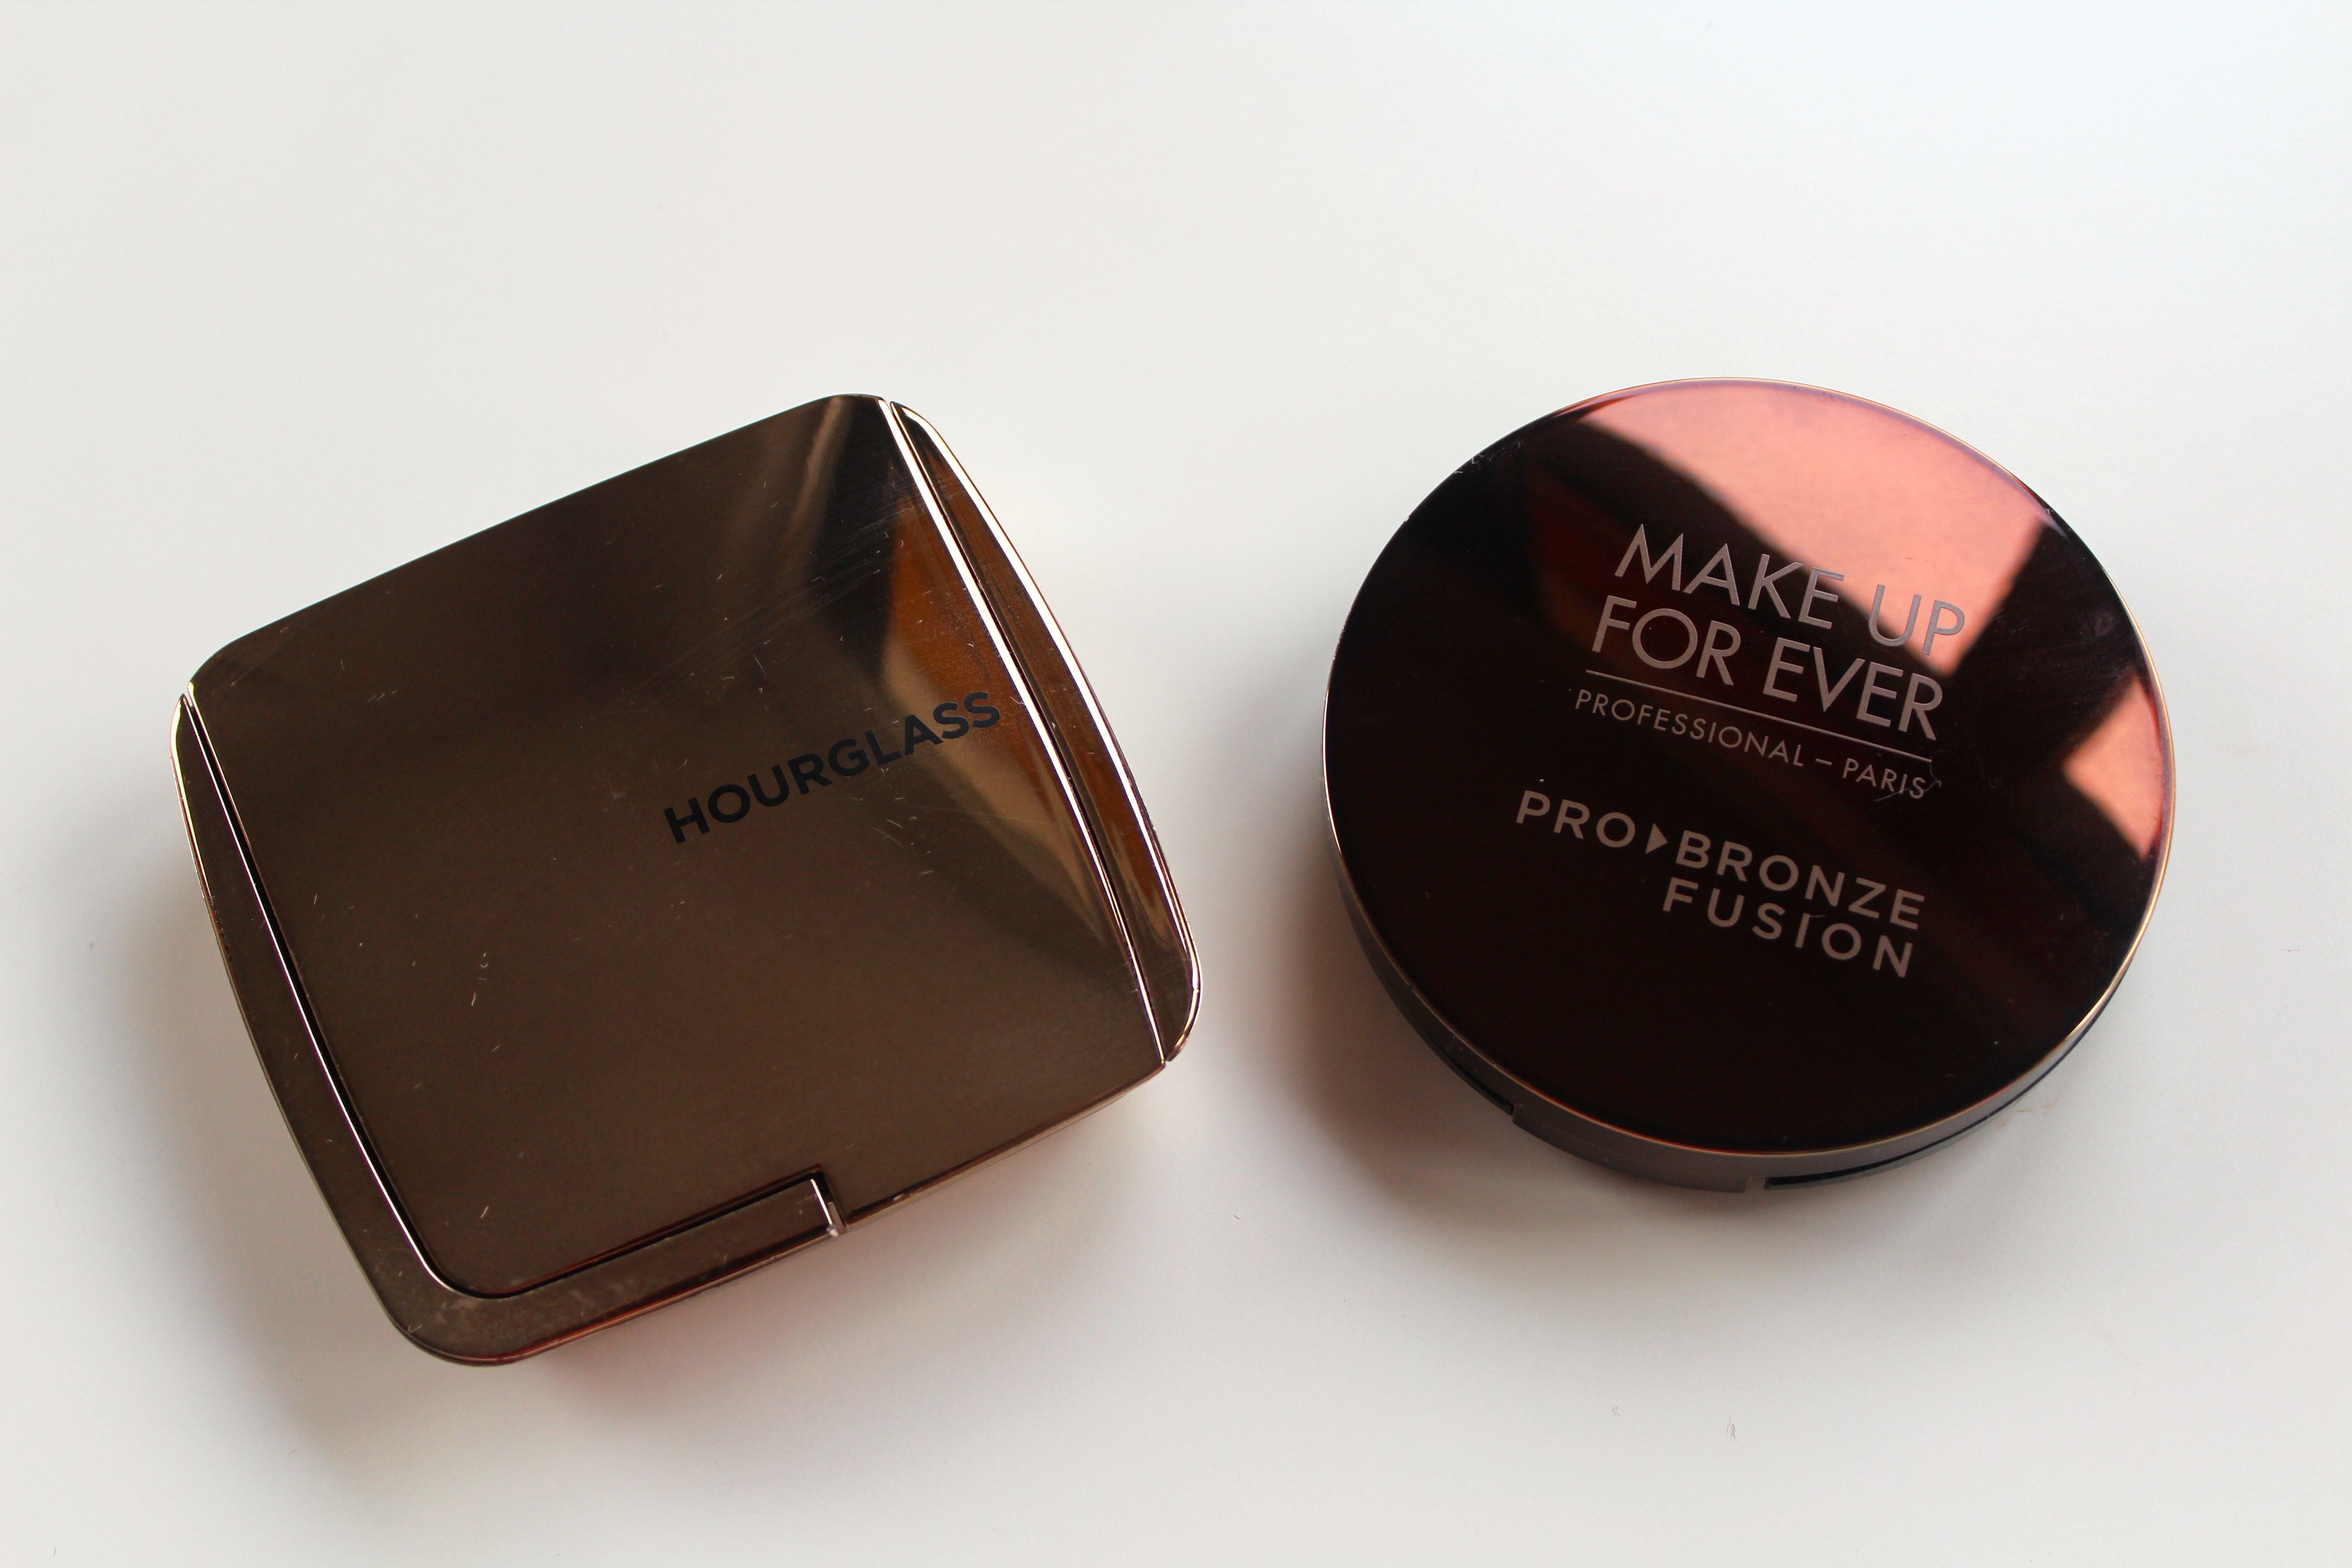 Hourglass Ambient Lighting Bronzer vs Make Up For Ever Pro Bronze Fusion Review by Face Made Up